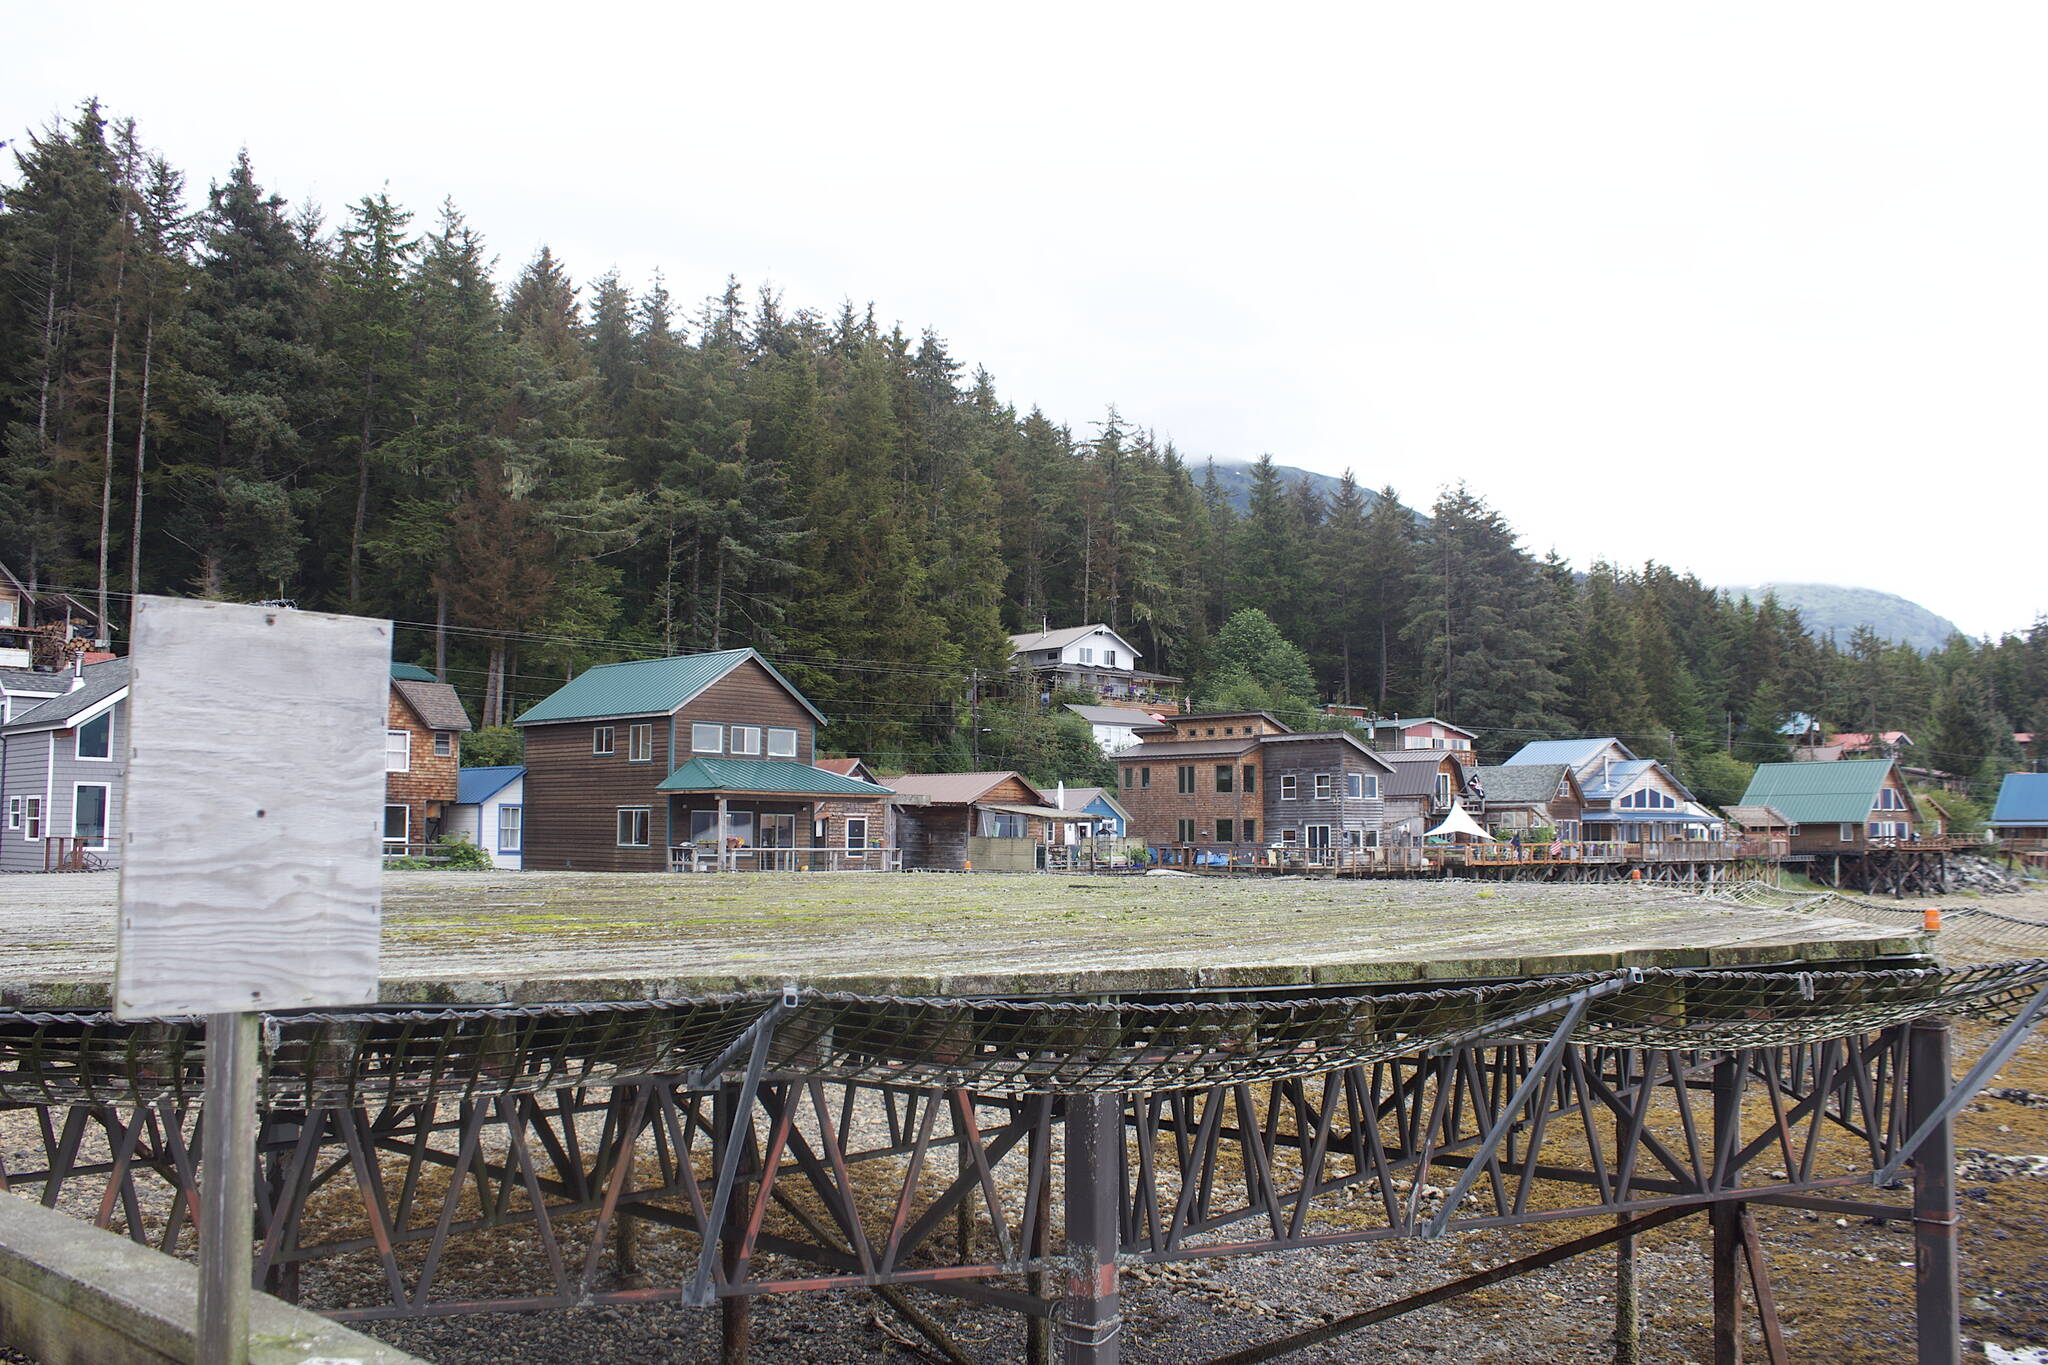 A blank wood sign at the seaplane dock welcomes people to Tenakee Springs, where the adjacent moss-covered helipad has been in disrepair and unusable for years. The town is struggling with numerous infrastructure deficiencies, along with a shrinking population and uncertain future. (Mark Sabbatini / Juneau Empire)